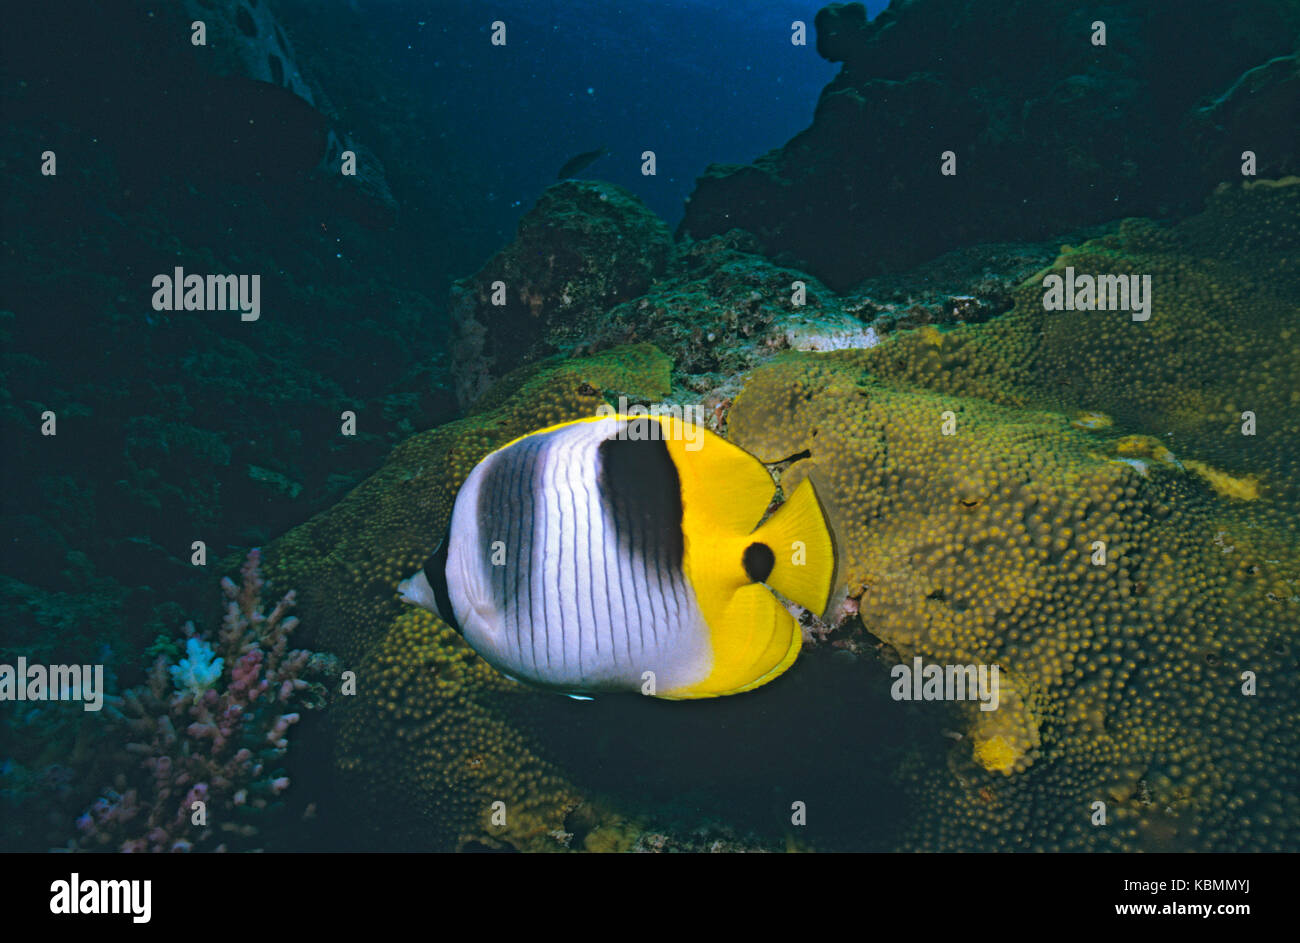 Pacific double-saddle butterflyfish (Chaetodon ulietensis), grows to 15 cm. Great Barrier Reef Marine Park, Queensland, Australia Stock Photo